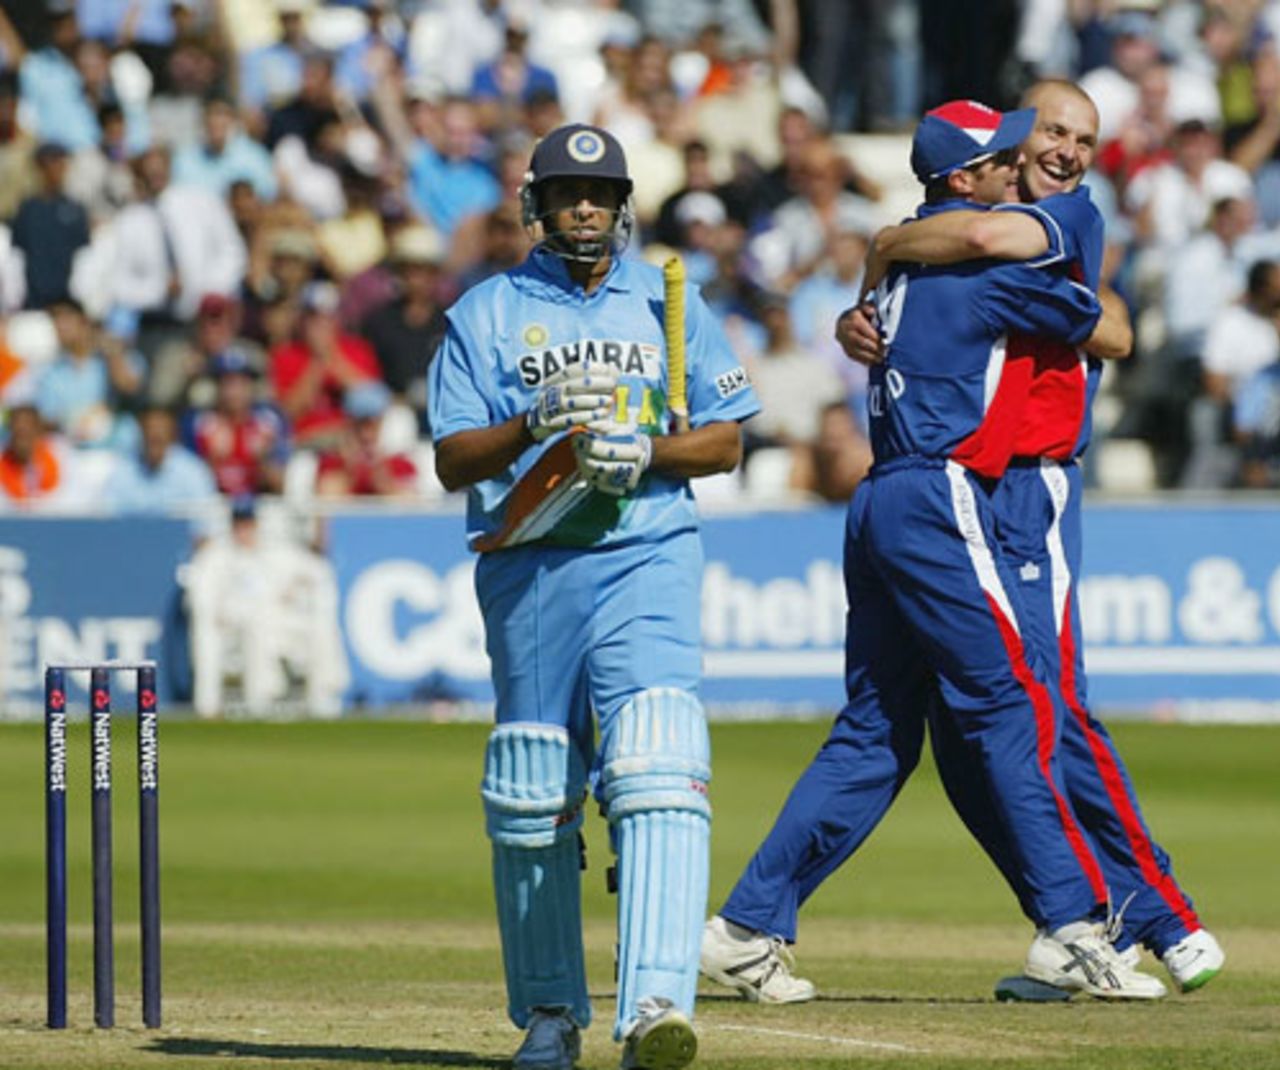 Alex Wharf celebrates as VVS Laxman is dismissed, during the first one-day international at Trent Bridge, England v India, NatWest Challenge, September 1, 2004